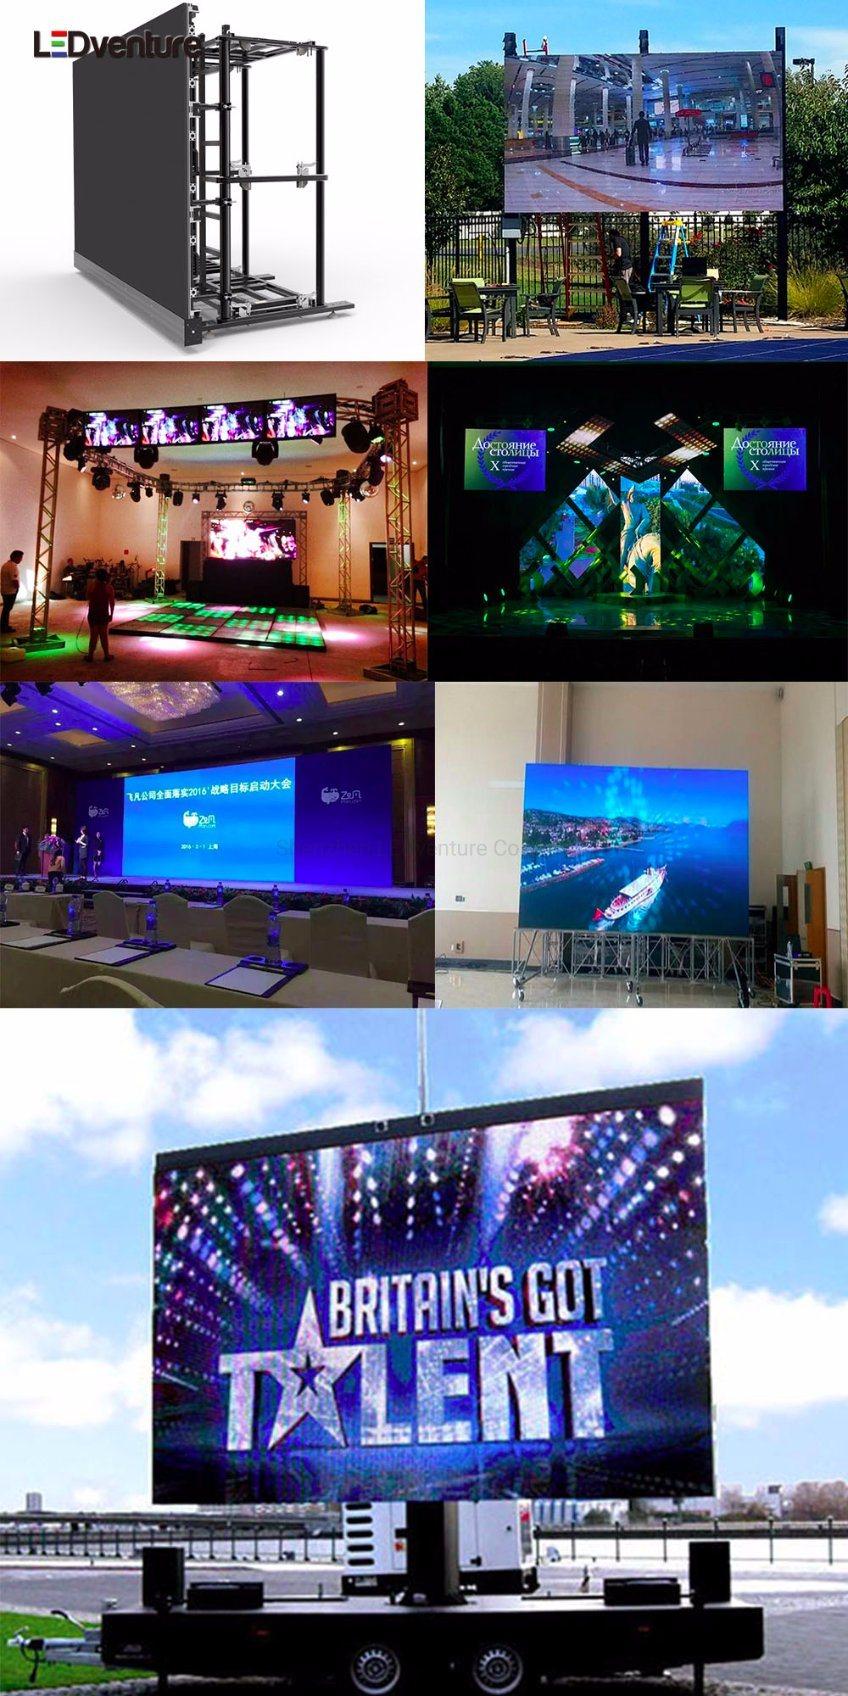 LED LED Video Wall Full Color Indoor Outdoor with P0.93 P1.25 P1.56 P1.66 P1.87 P2 P2.5 P3 for Advertising Rental Billboard Display Screen Panel Price